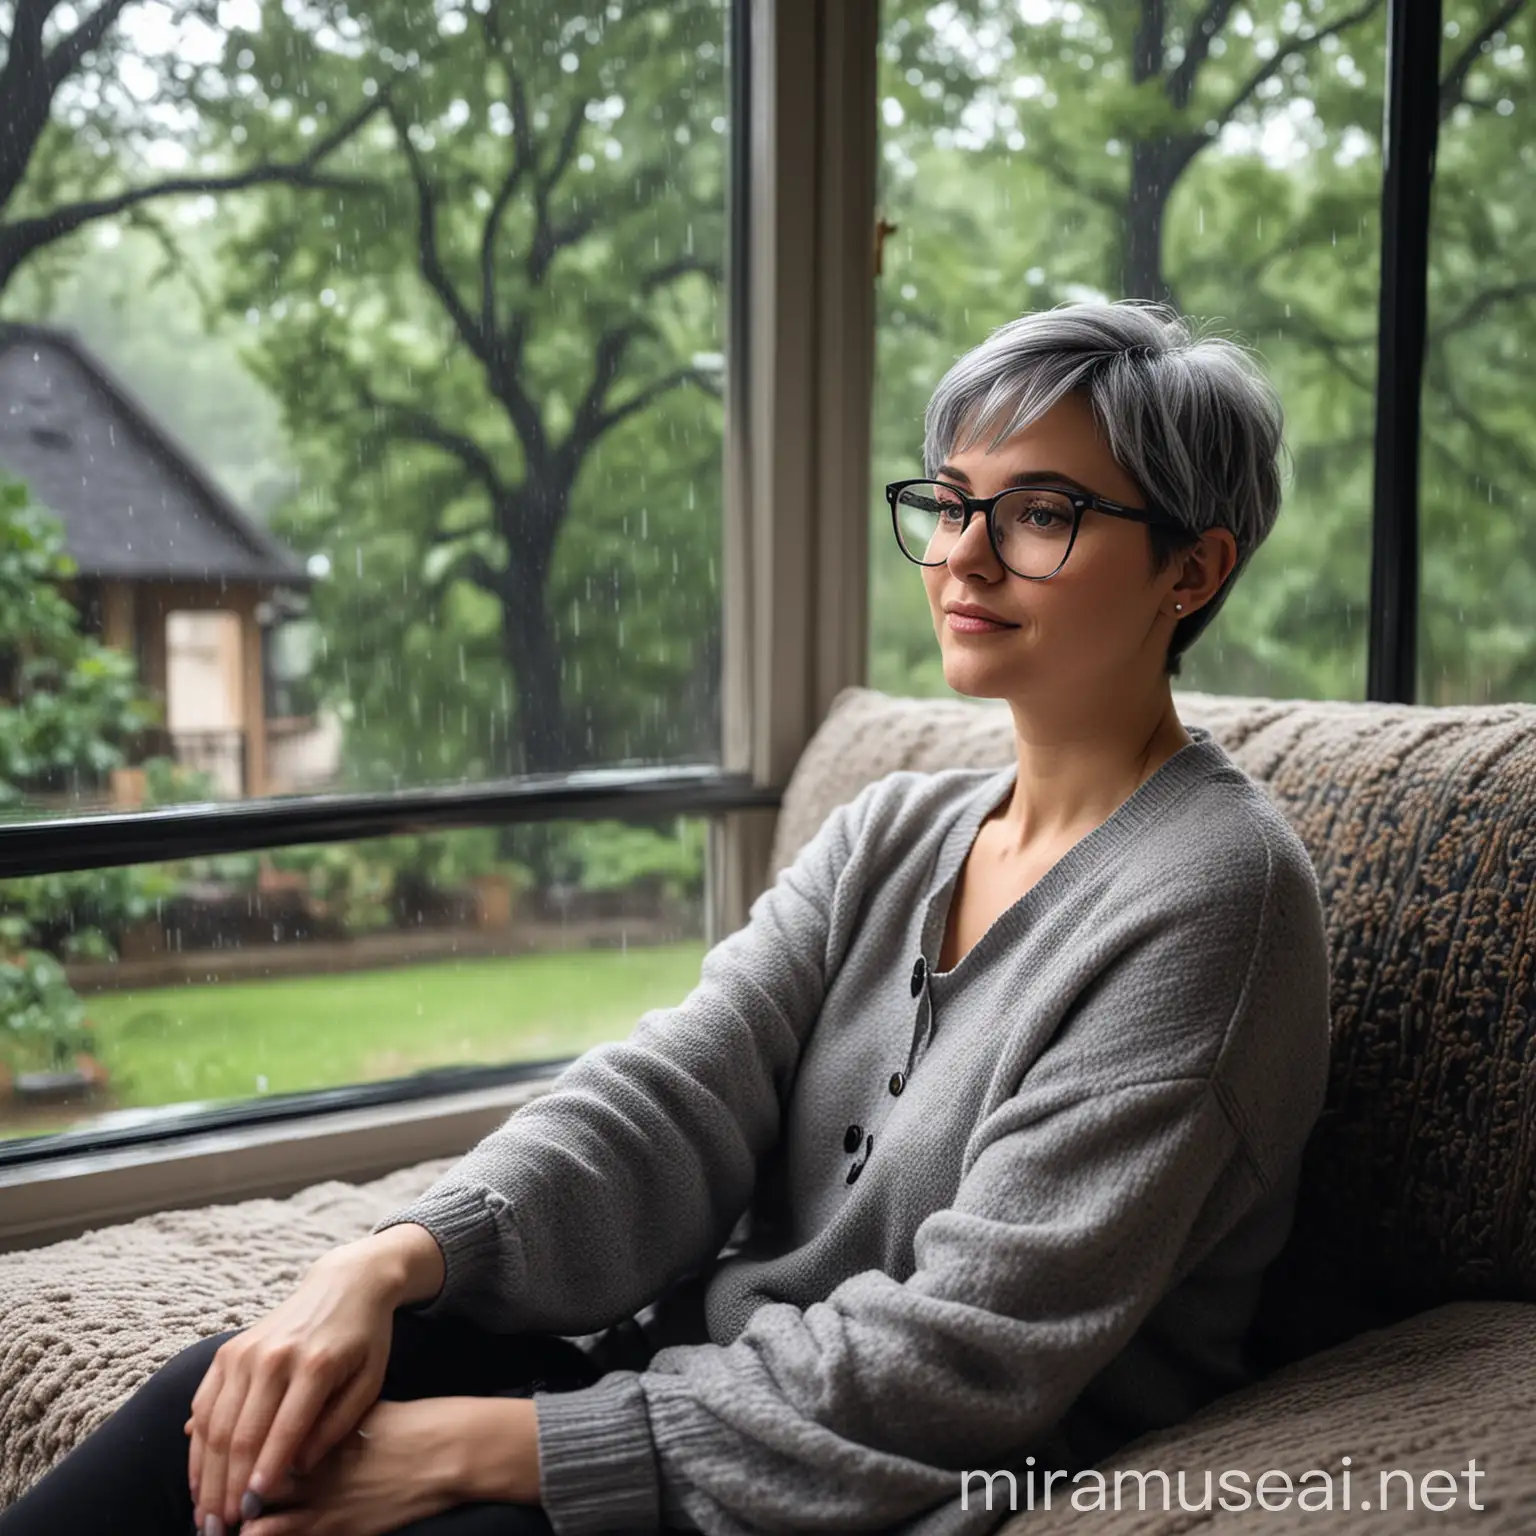 A darling woman with short black and silver hair and glasses, relaxing on a couch in a cottage with a rug, looking out the window at large oak trees while it rains. 